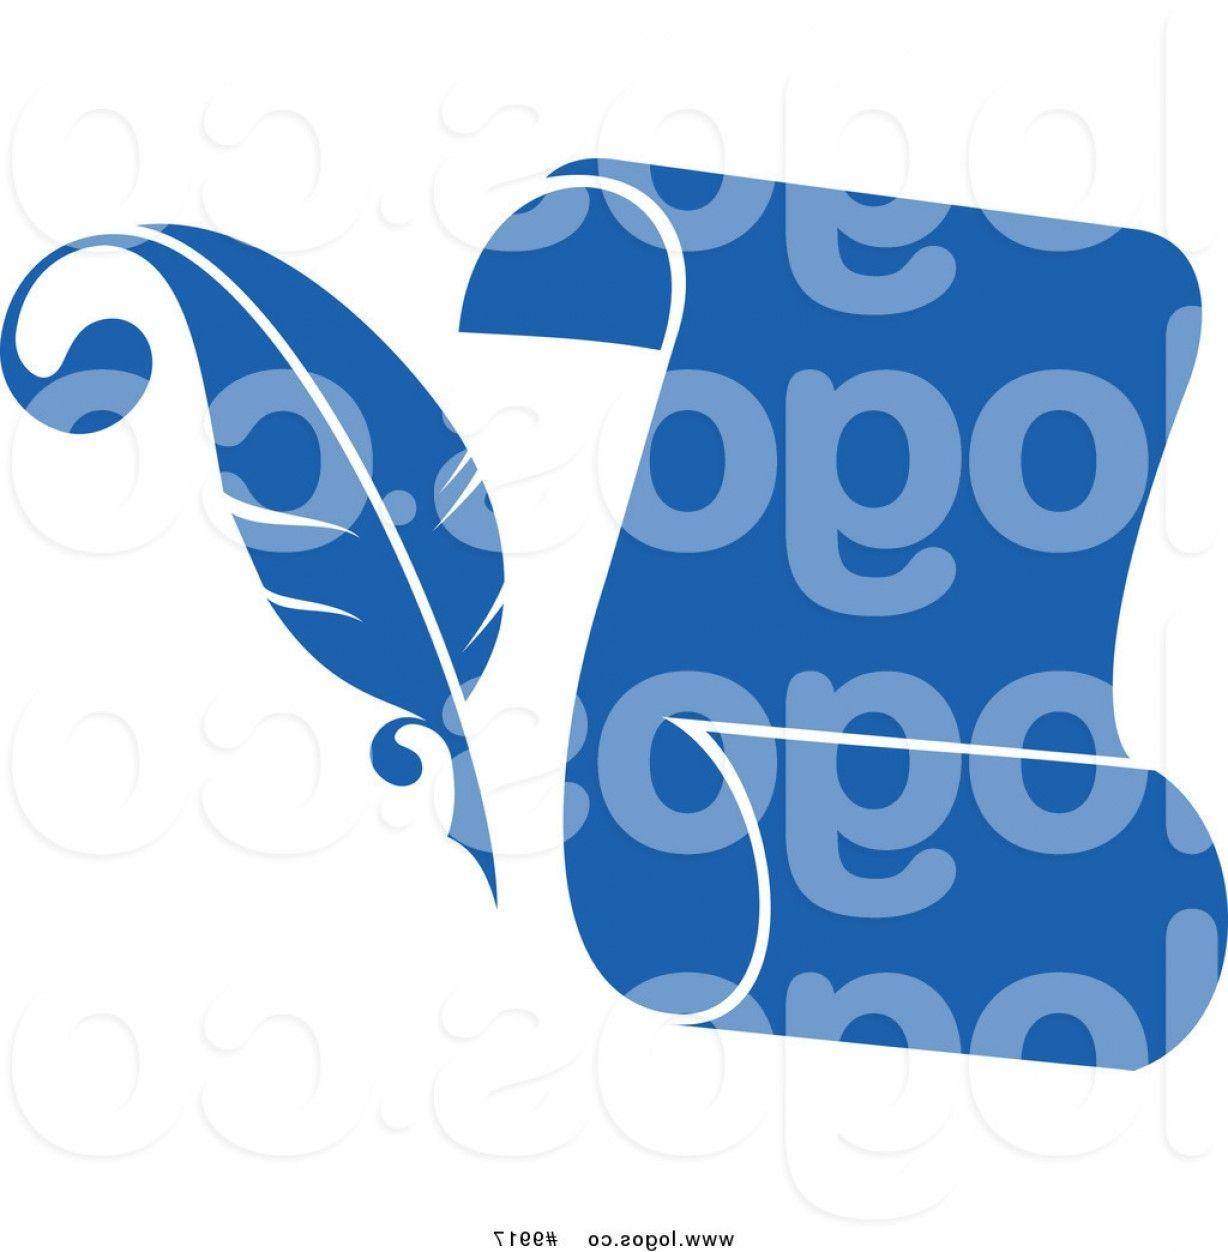 Quill Scroll Logo - Royalty Free Clip Art Vector Logo Of A Blue Feather Quill Pen And ...